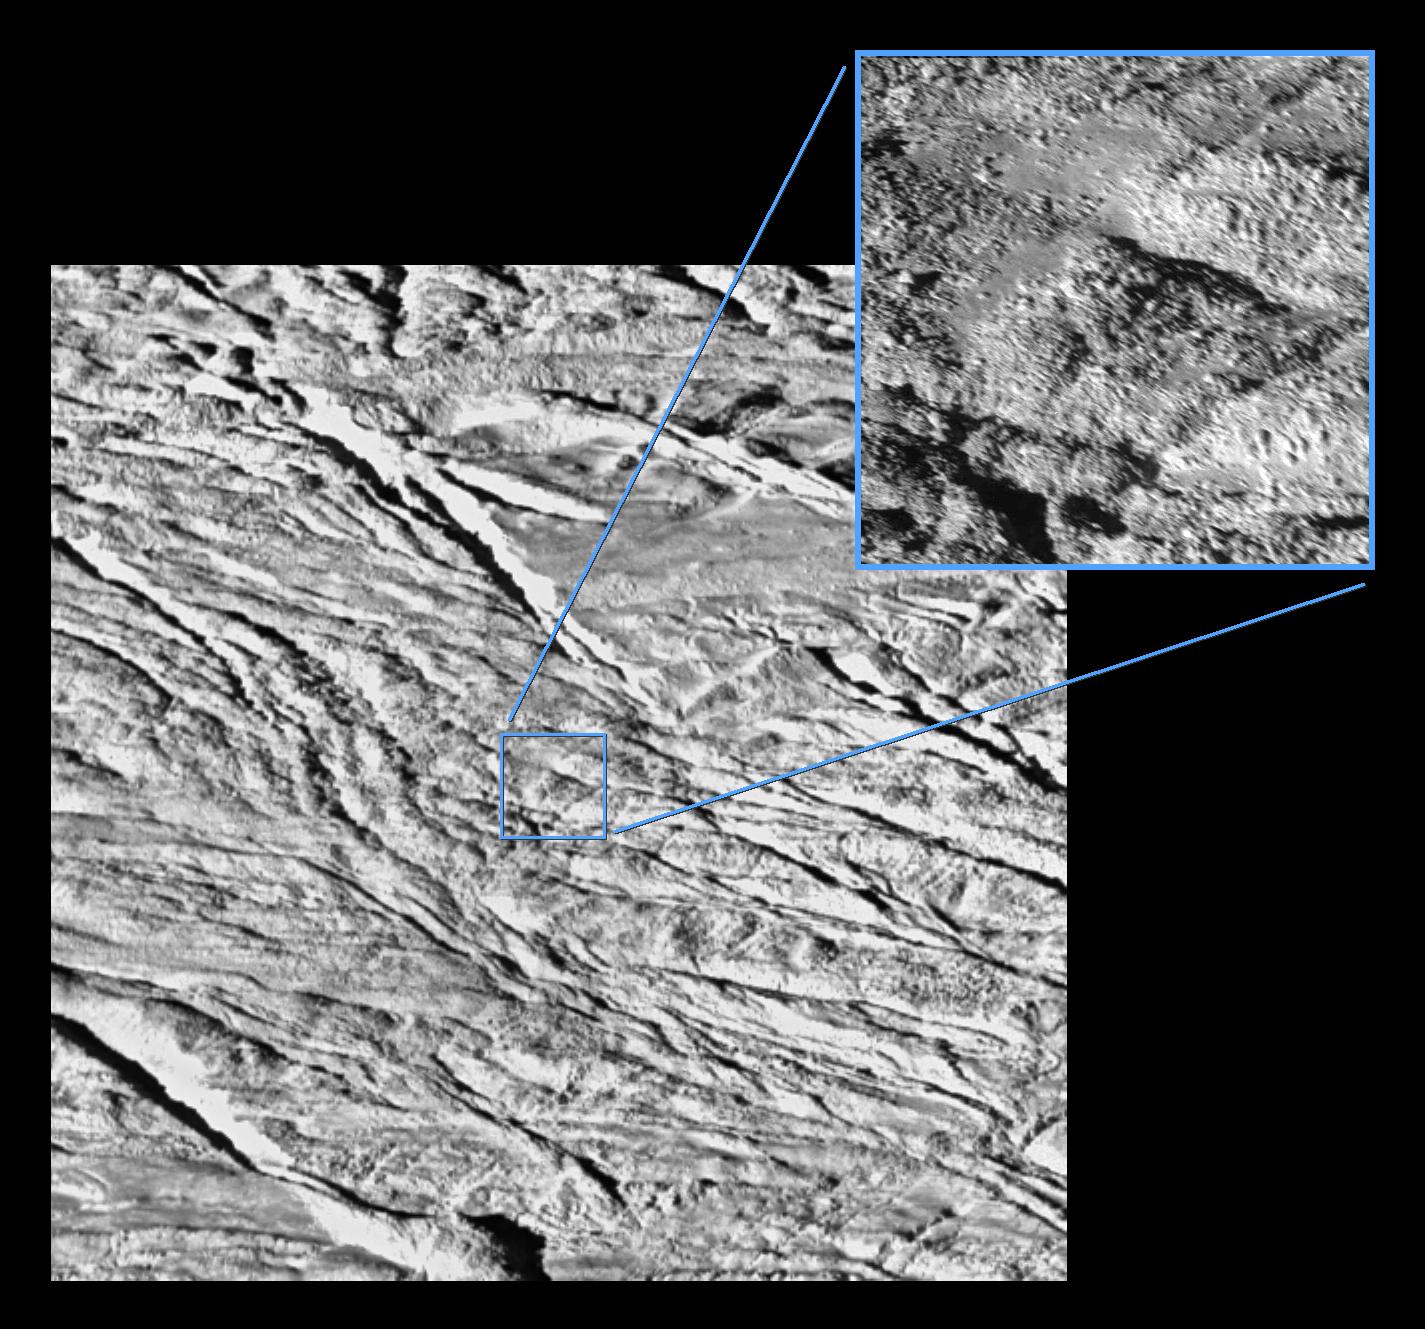 Two views of Enceladus: one, larger view is of lower resolution; the smaller inset view is of higher resolution